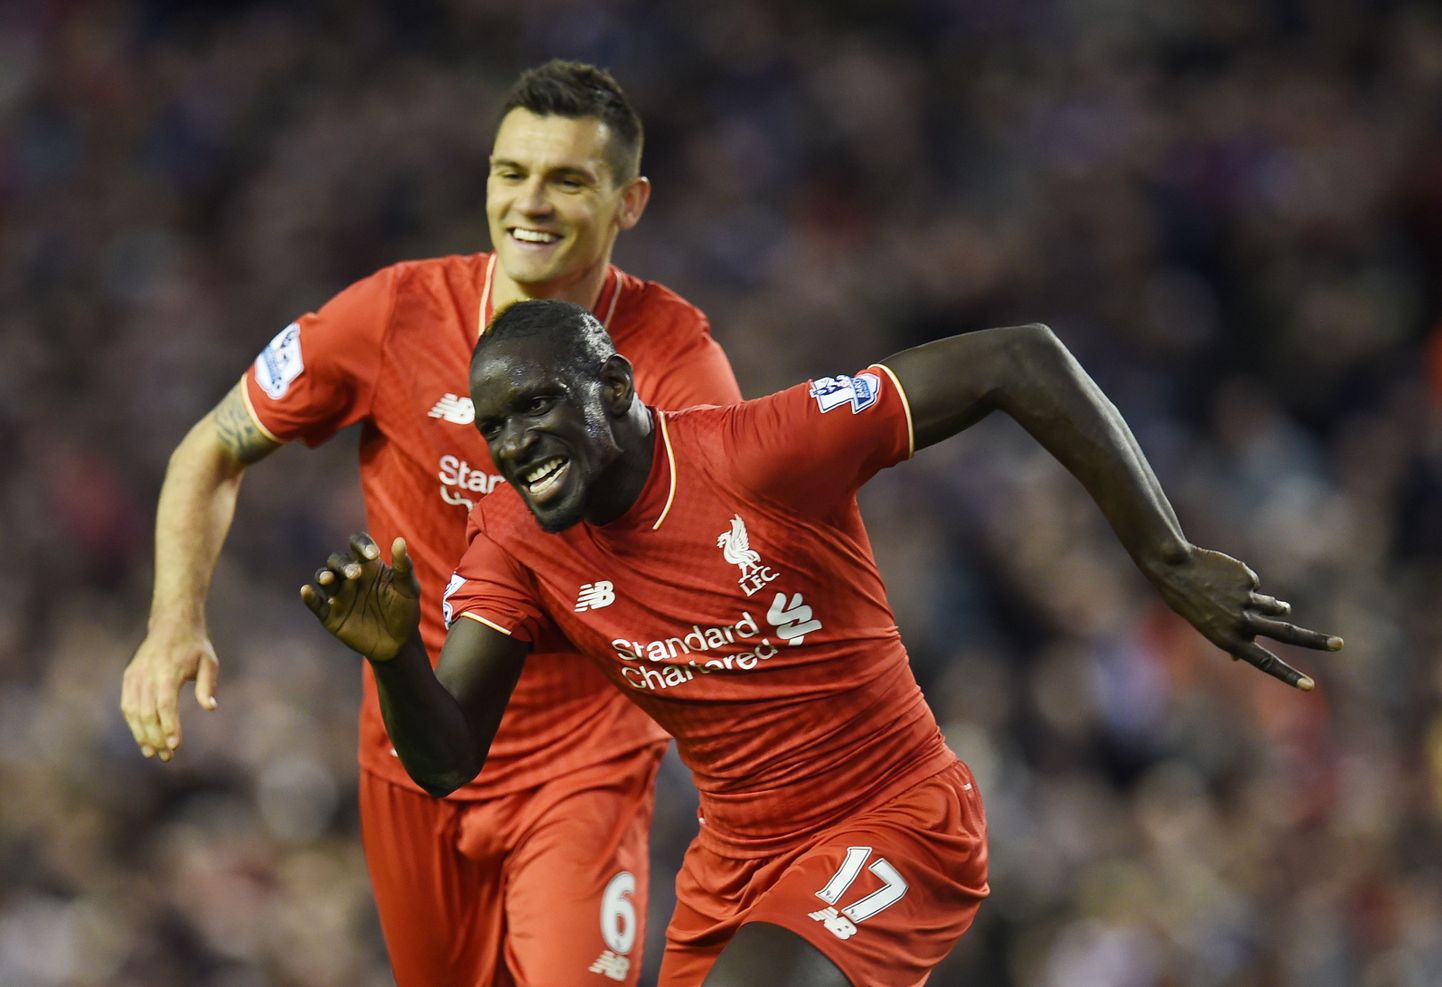 (FILES) This file photo taken on April 20, 2016 shows Liverpool's French defender Mamadou Sakho (R) celebrating with Liverpool's Croatian defender Dejan Lovren after scoring during the English Premier League football match between Liverpool and Everton at Anfield in Liverpool, north west England.
Liverpool defender Mamadou Sakho was on Thursday provisionally suspended for 30 days after failing a drugs test, European football's governing body UEFA announced on April 28, 2016. The France international reportedly tested positive for a fat burner after Liverpool's 1-1 draw against Manchester United in the Europa League on March 17.
 / AFP PHOTO / PAUL ELLIS